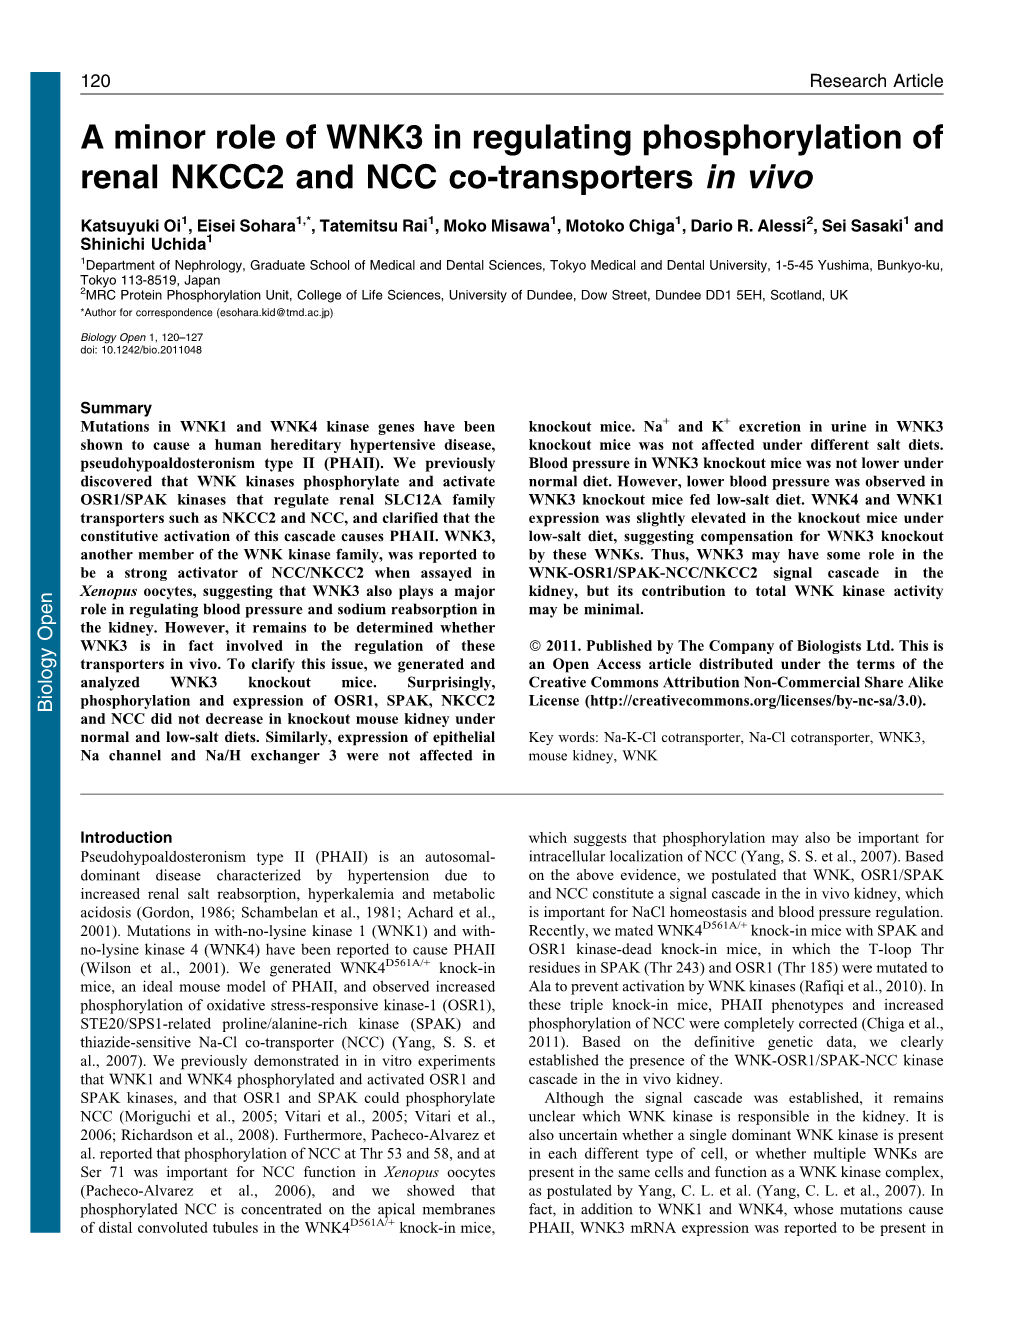 A Minor Role of WNK3 in Regulating Phosphorylation of Renal NKCC2 and NCC Co-Transporters in Vivo